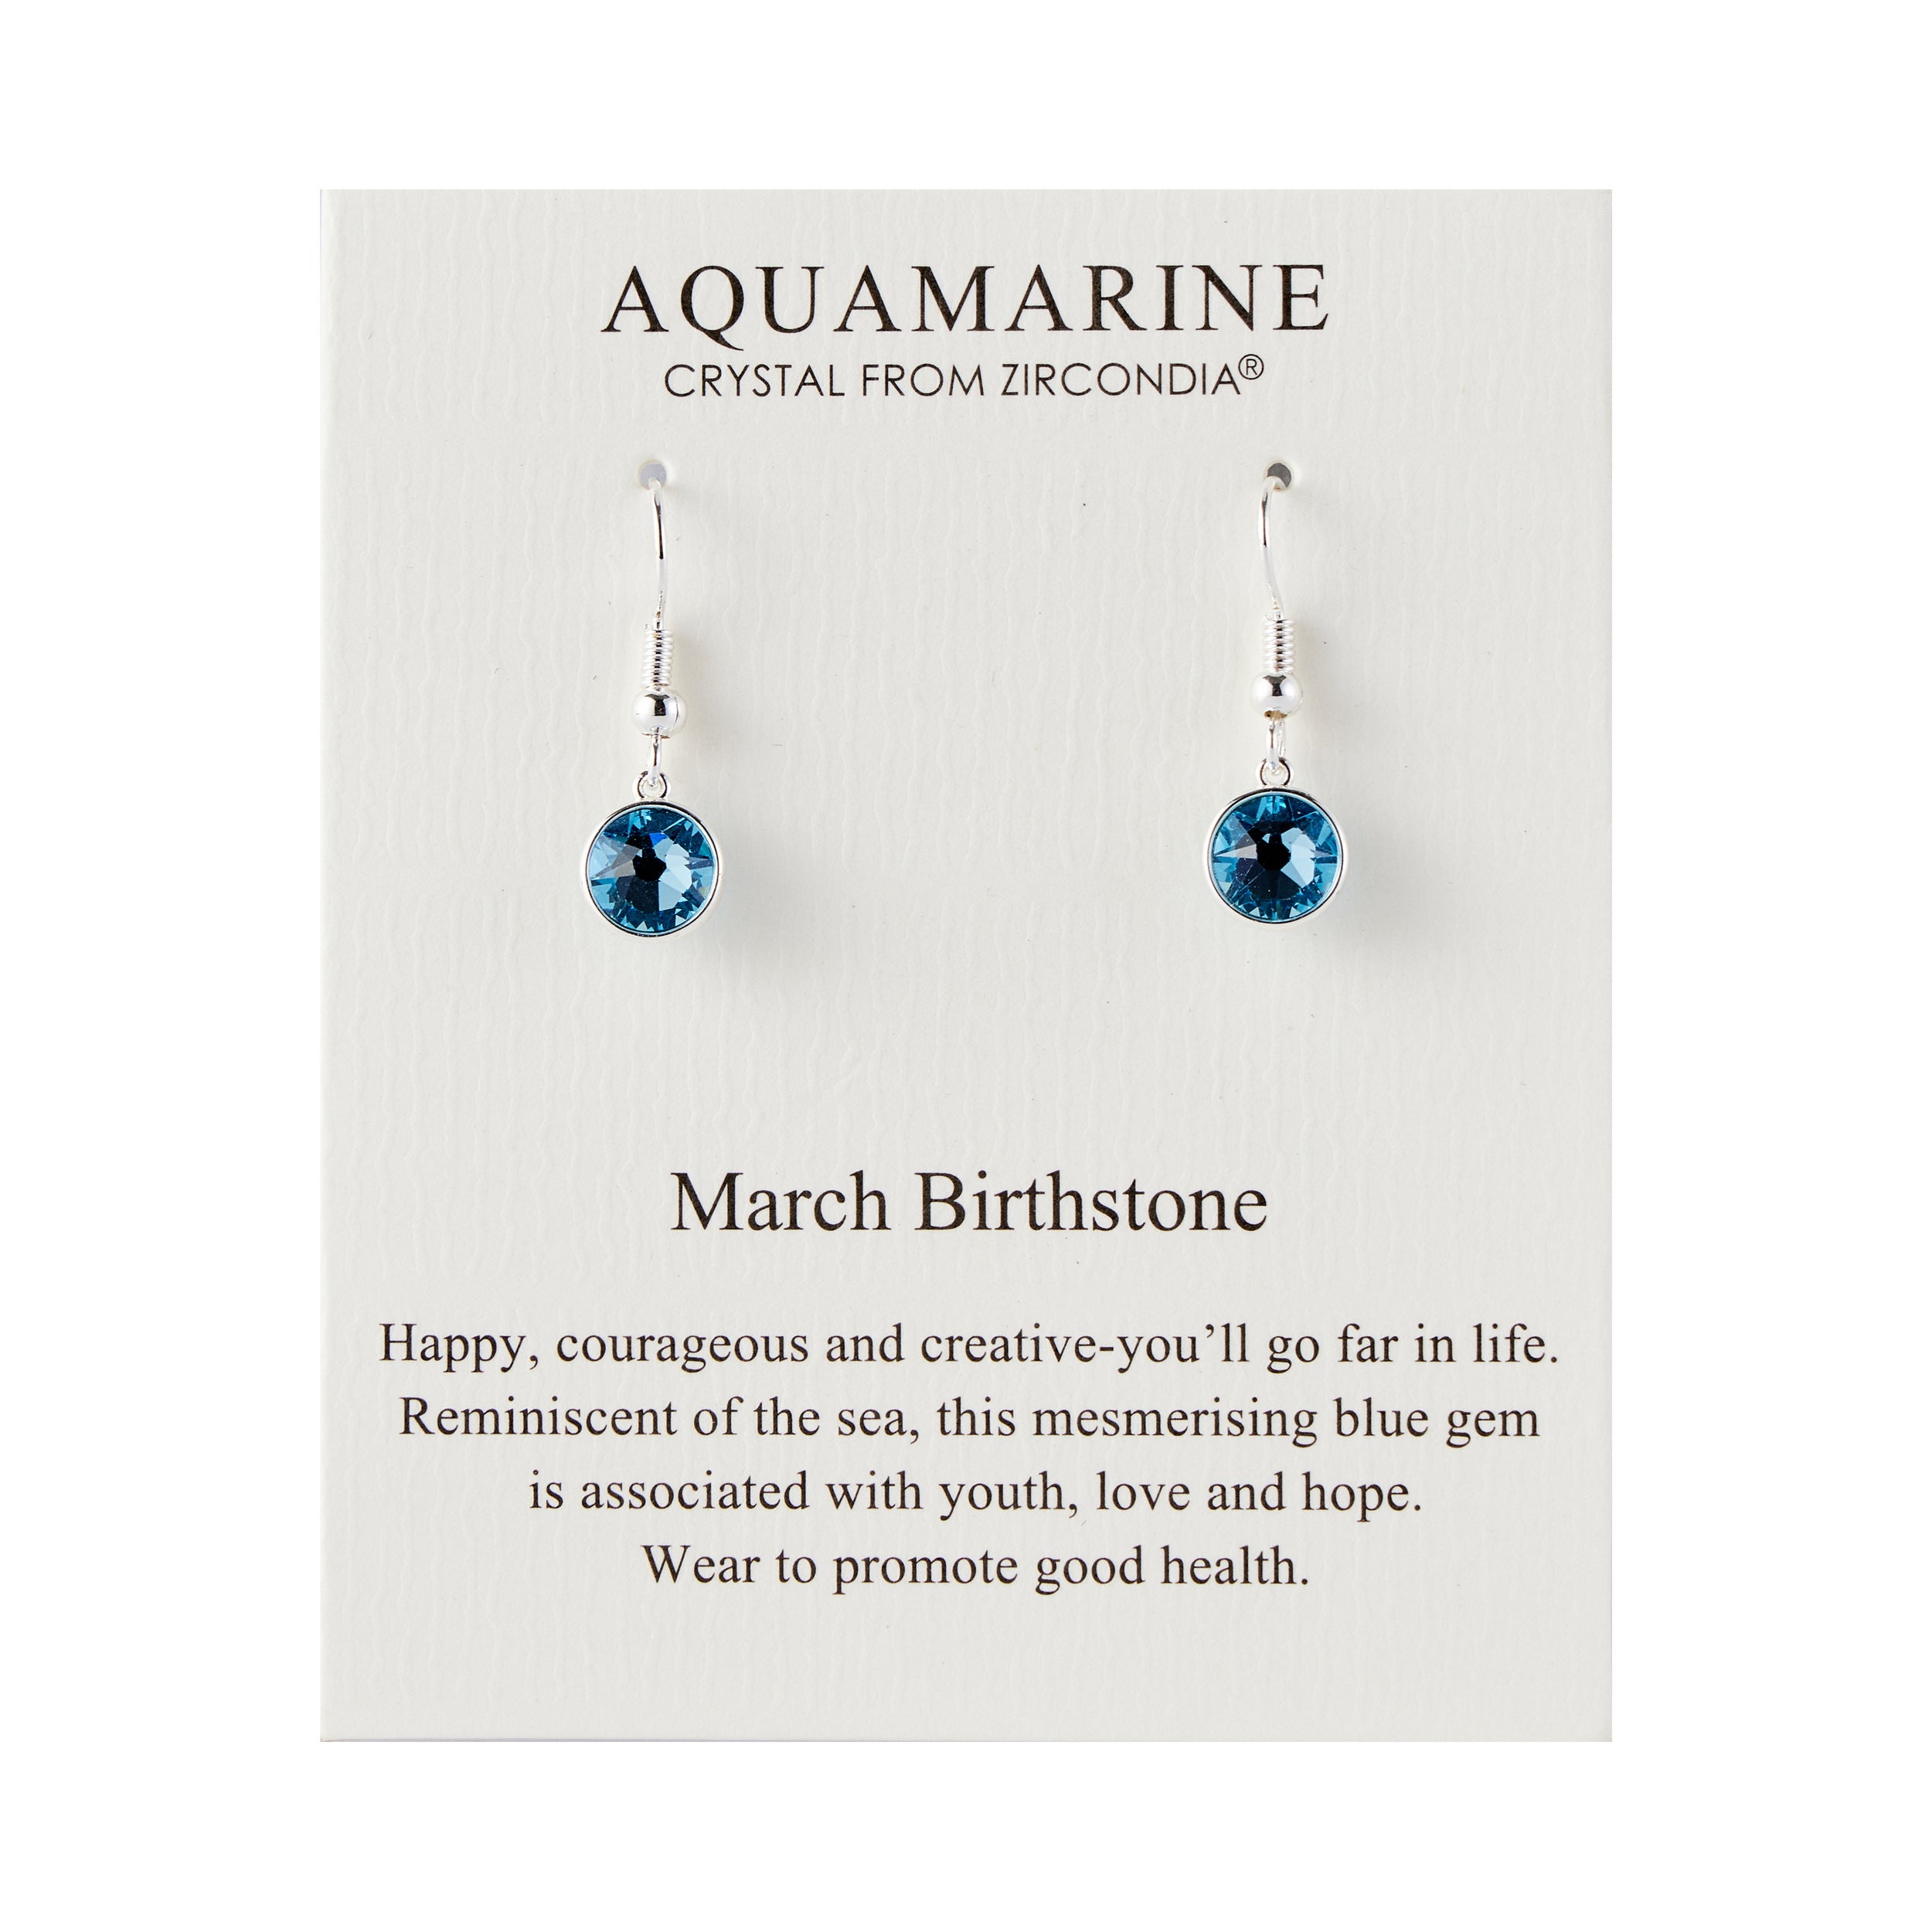 March Birthstone Drop Earrings Created with Aquamarine Zircondia® Crystals